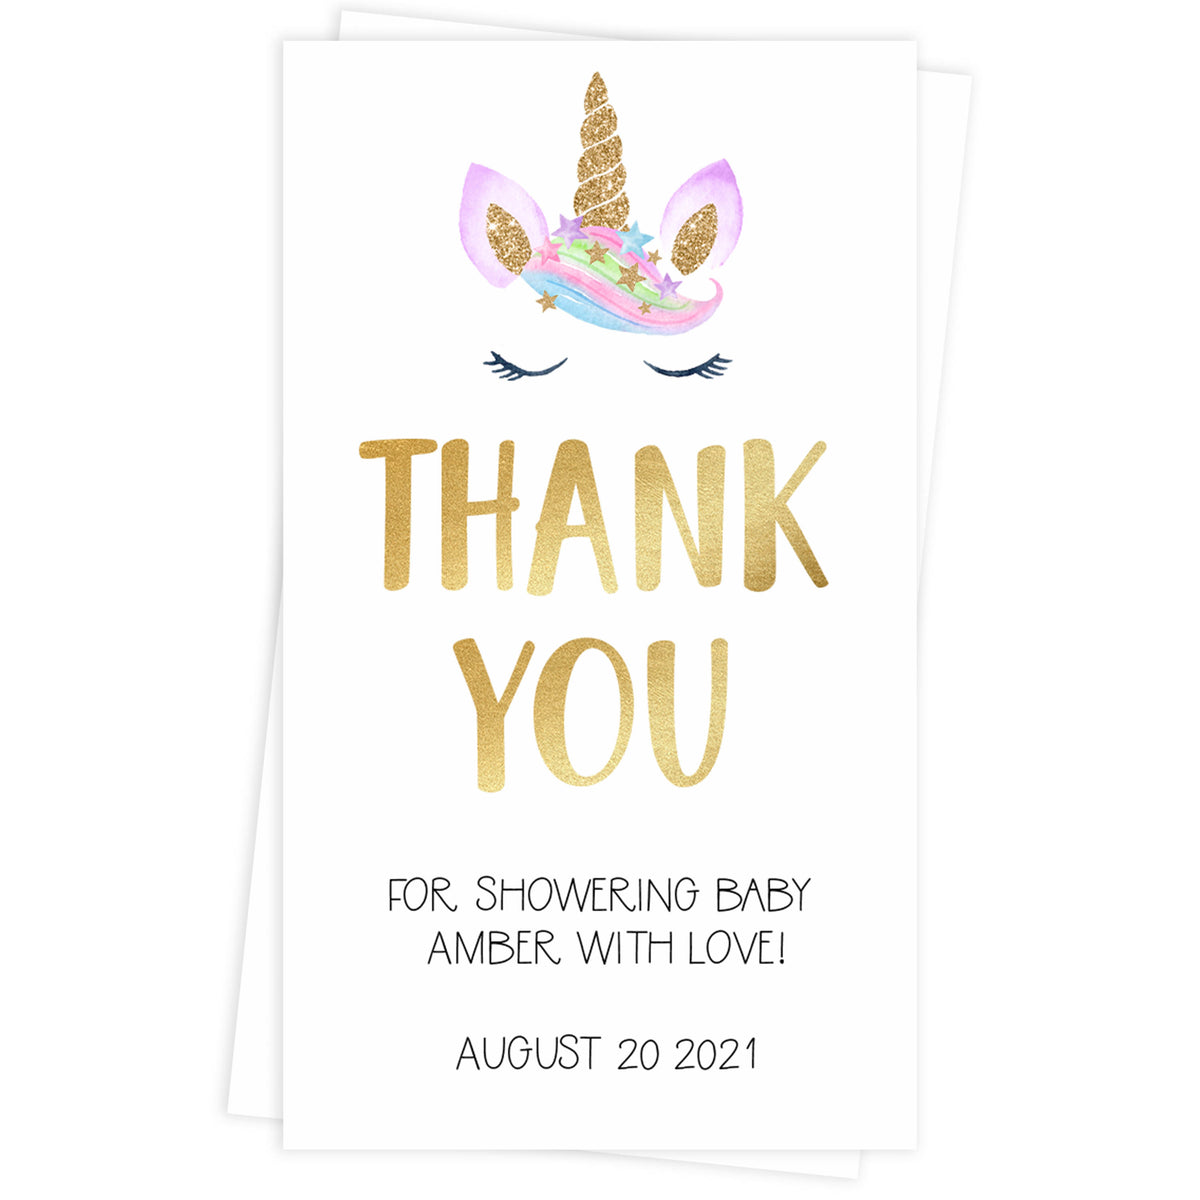 editable thank you tags, baby thank you tags, Printable baby shower games, unicorn baby games, baby shower games, fun baby shower ideas, top baby shower ideas, unicorn baby shower, baby shower games, fun unicorn baby shower ideas